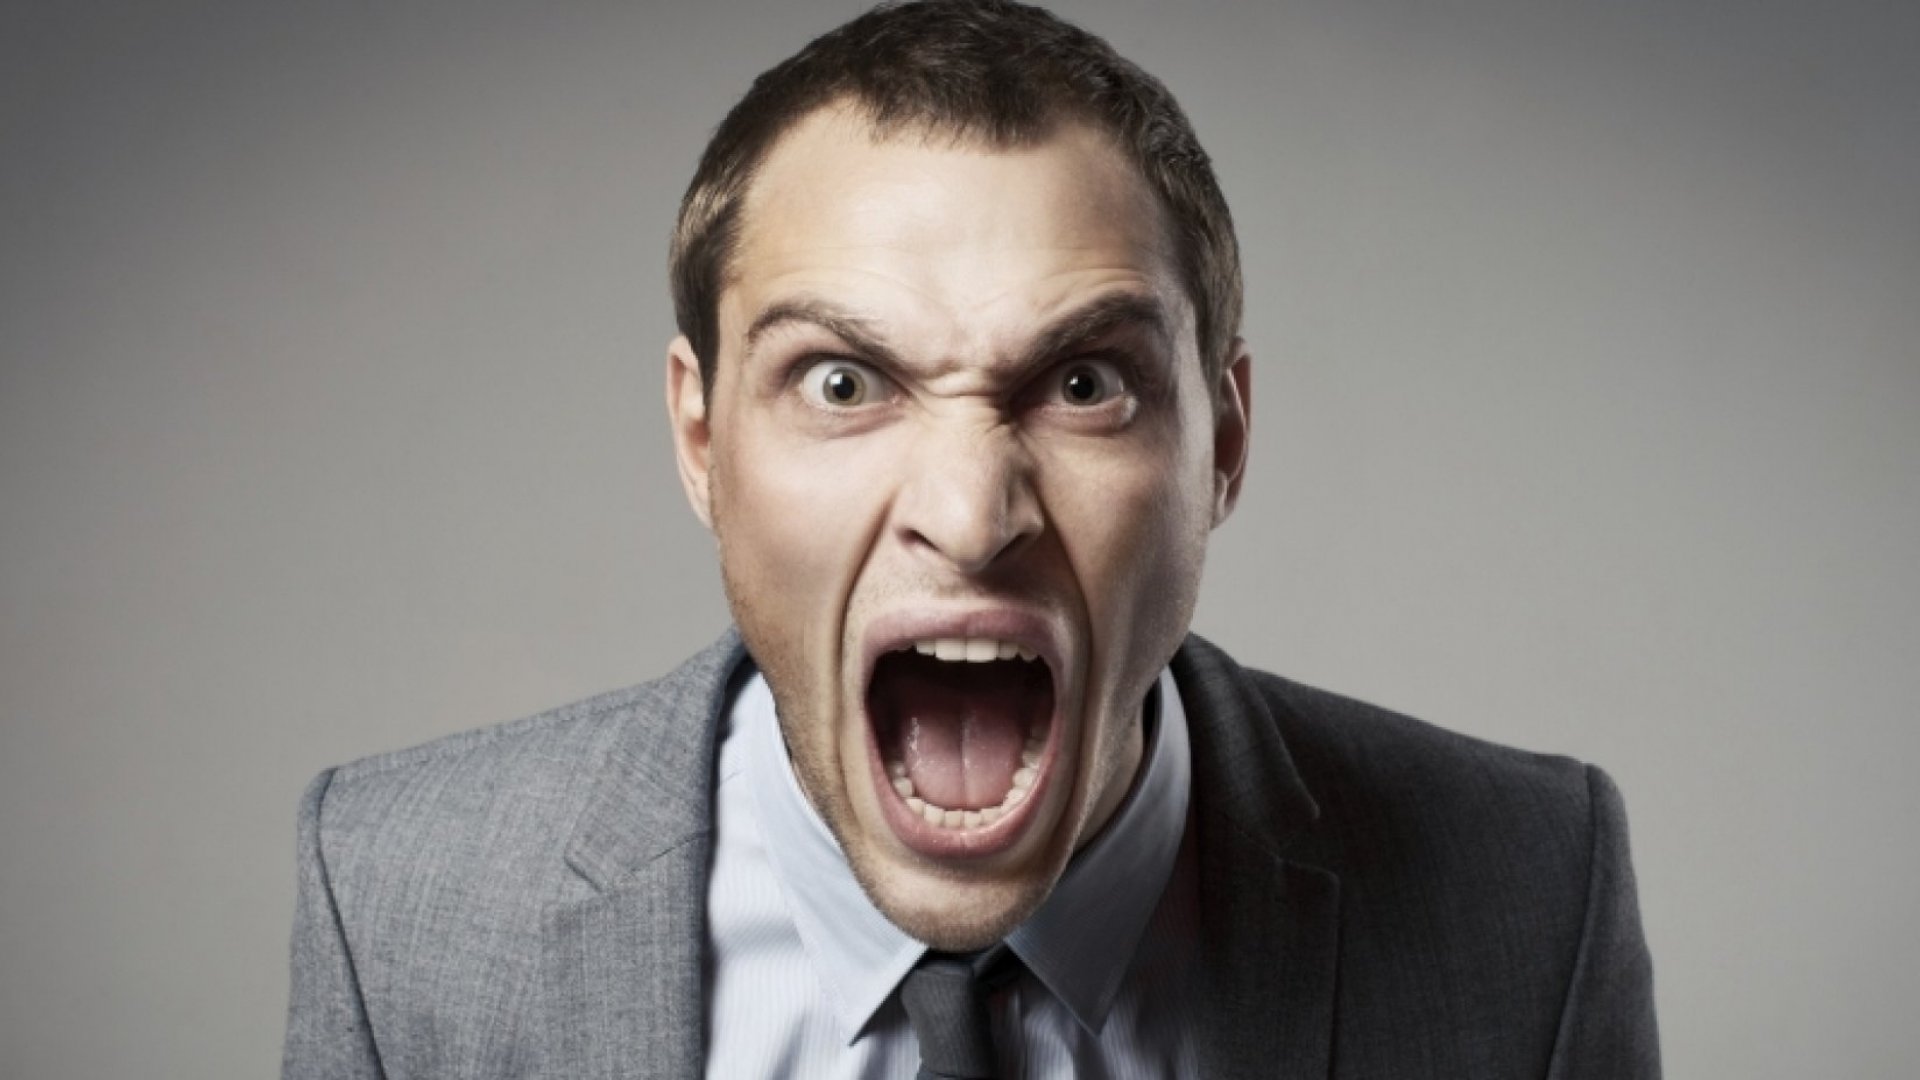 Read more about the article how to control anger: 20 tips to tame your temper